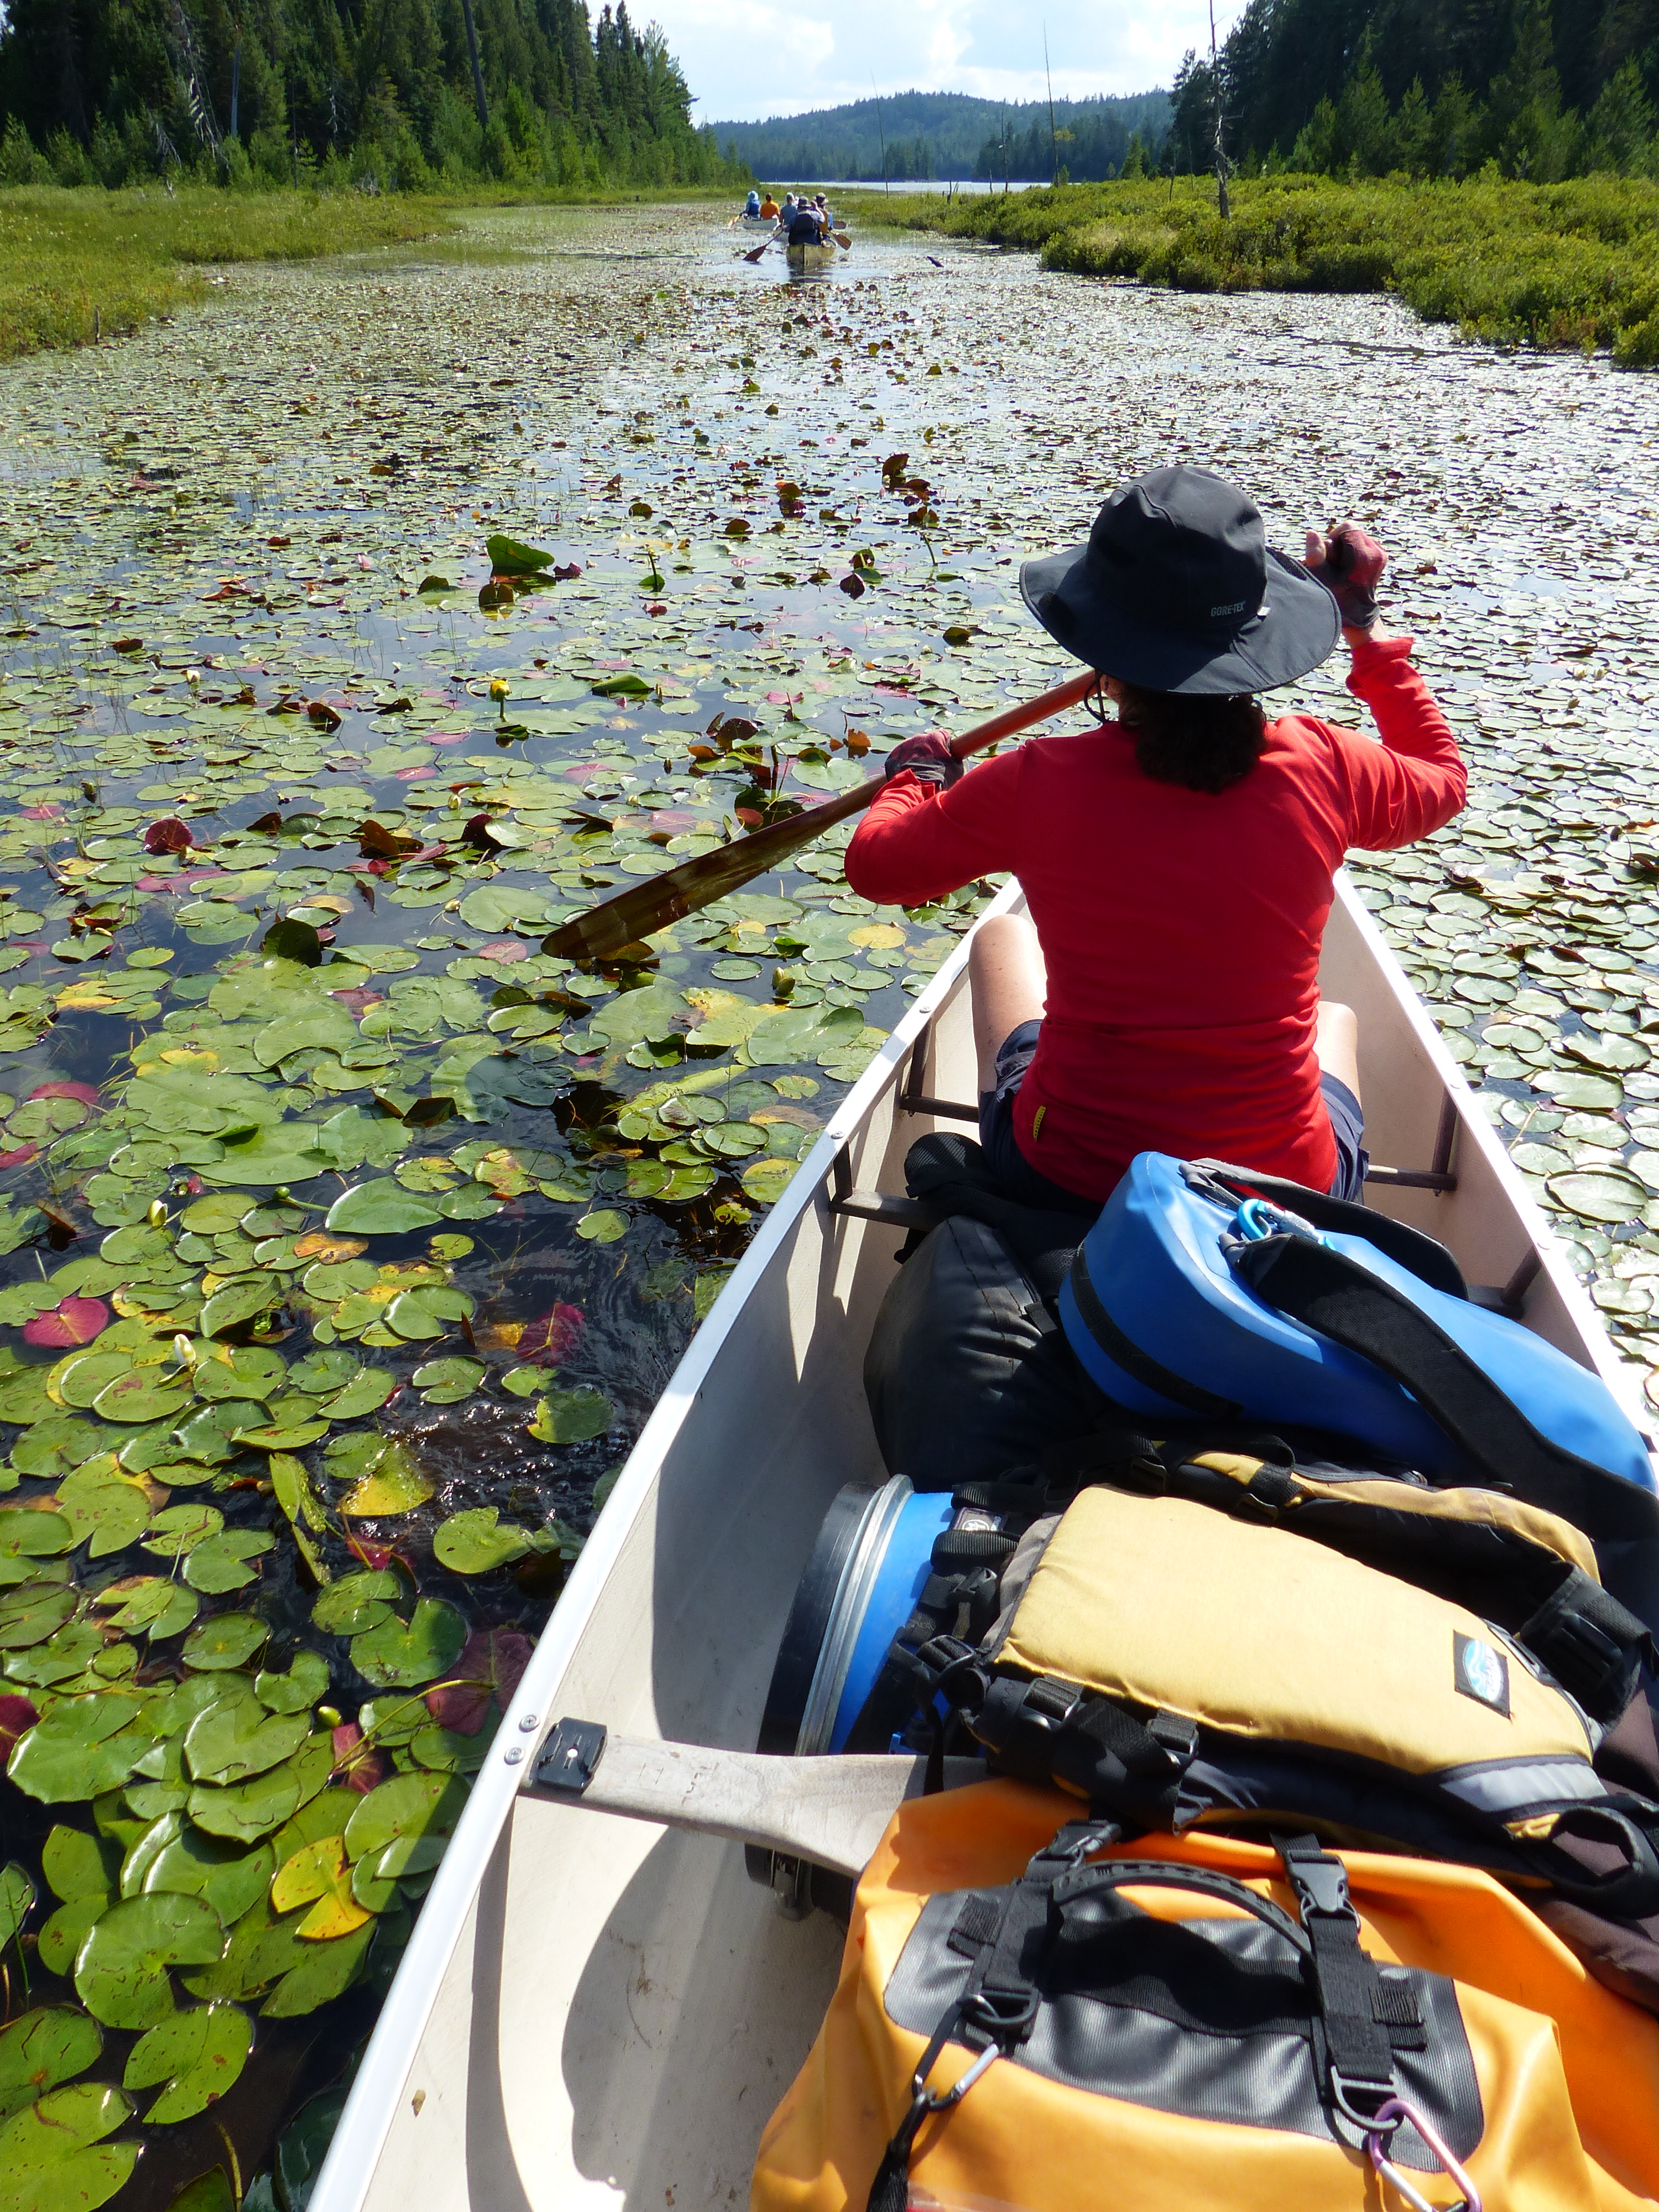 Canoeing through lily pads